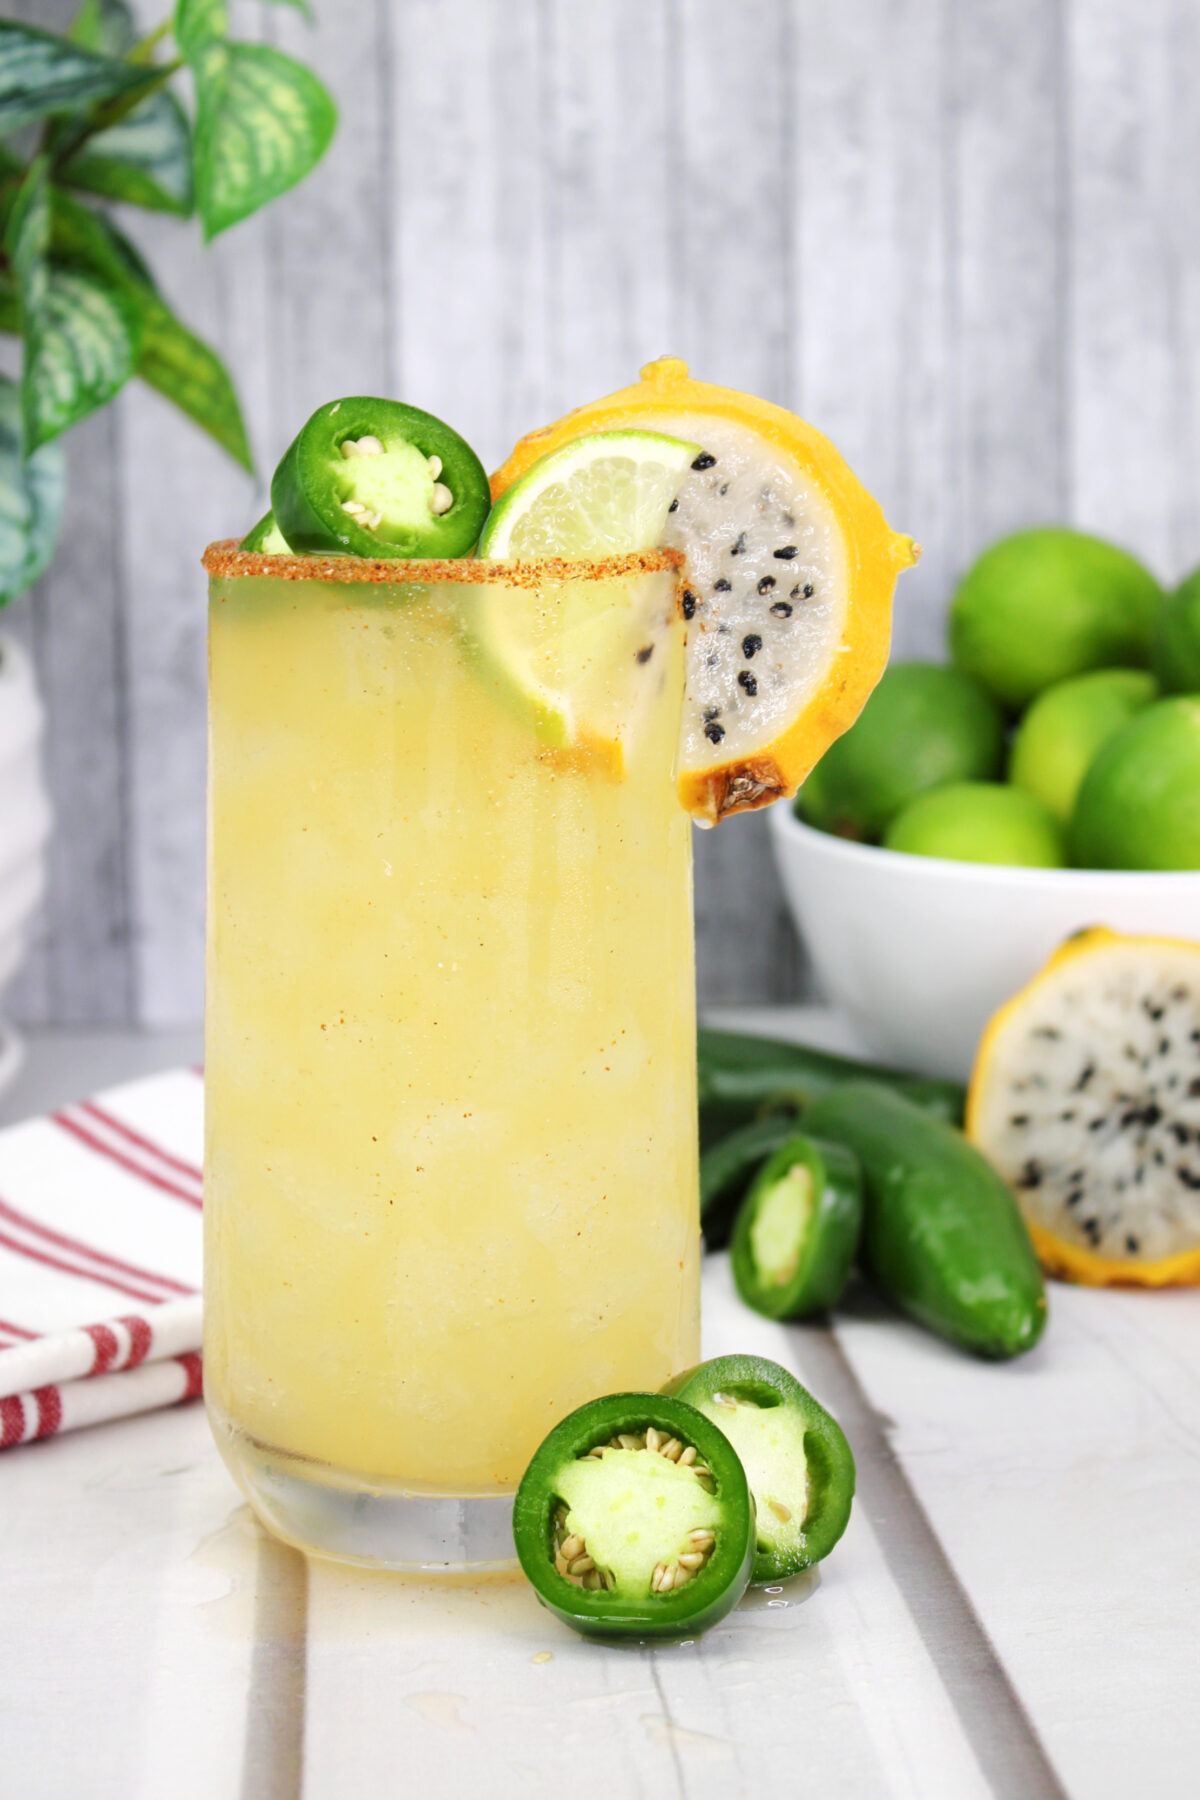 Spice up your summer with this fun and flavorful recipe for a Jalapeno Dragon Fruit Margarita. Perfect for outdoor gatherings!